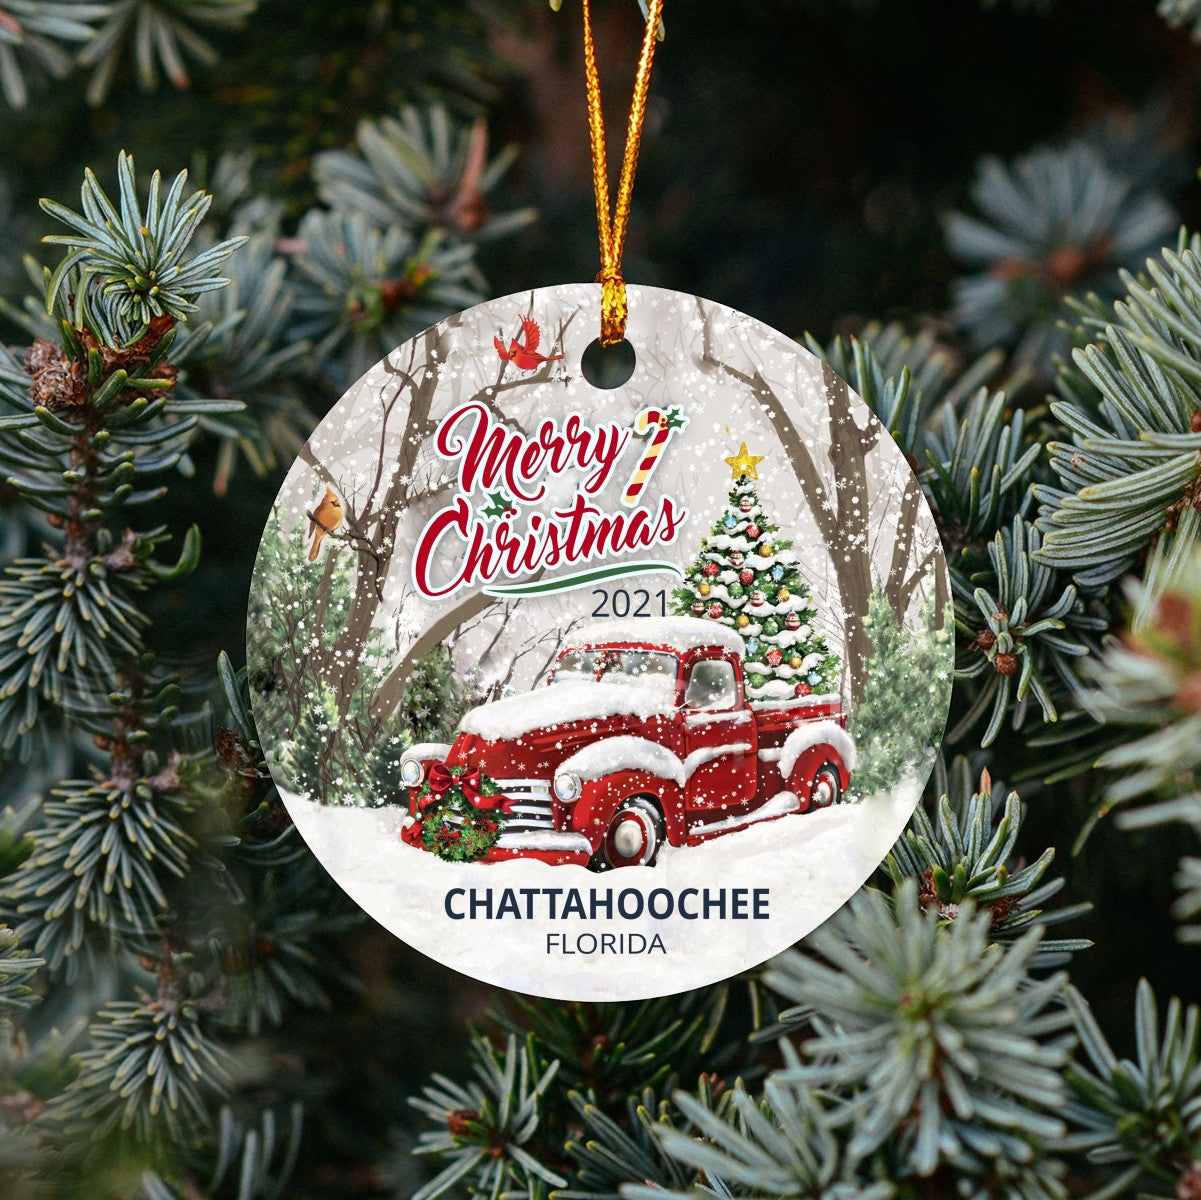 Christmas Tree Ornaments Chattahoochee - Ornament With Name City, State Chattahoochee Florida FL Ornament - Red Truck Xmas Ornaments 3'' Plastic Gift For Family, Friend And Housewarming